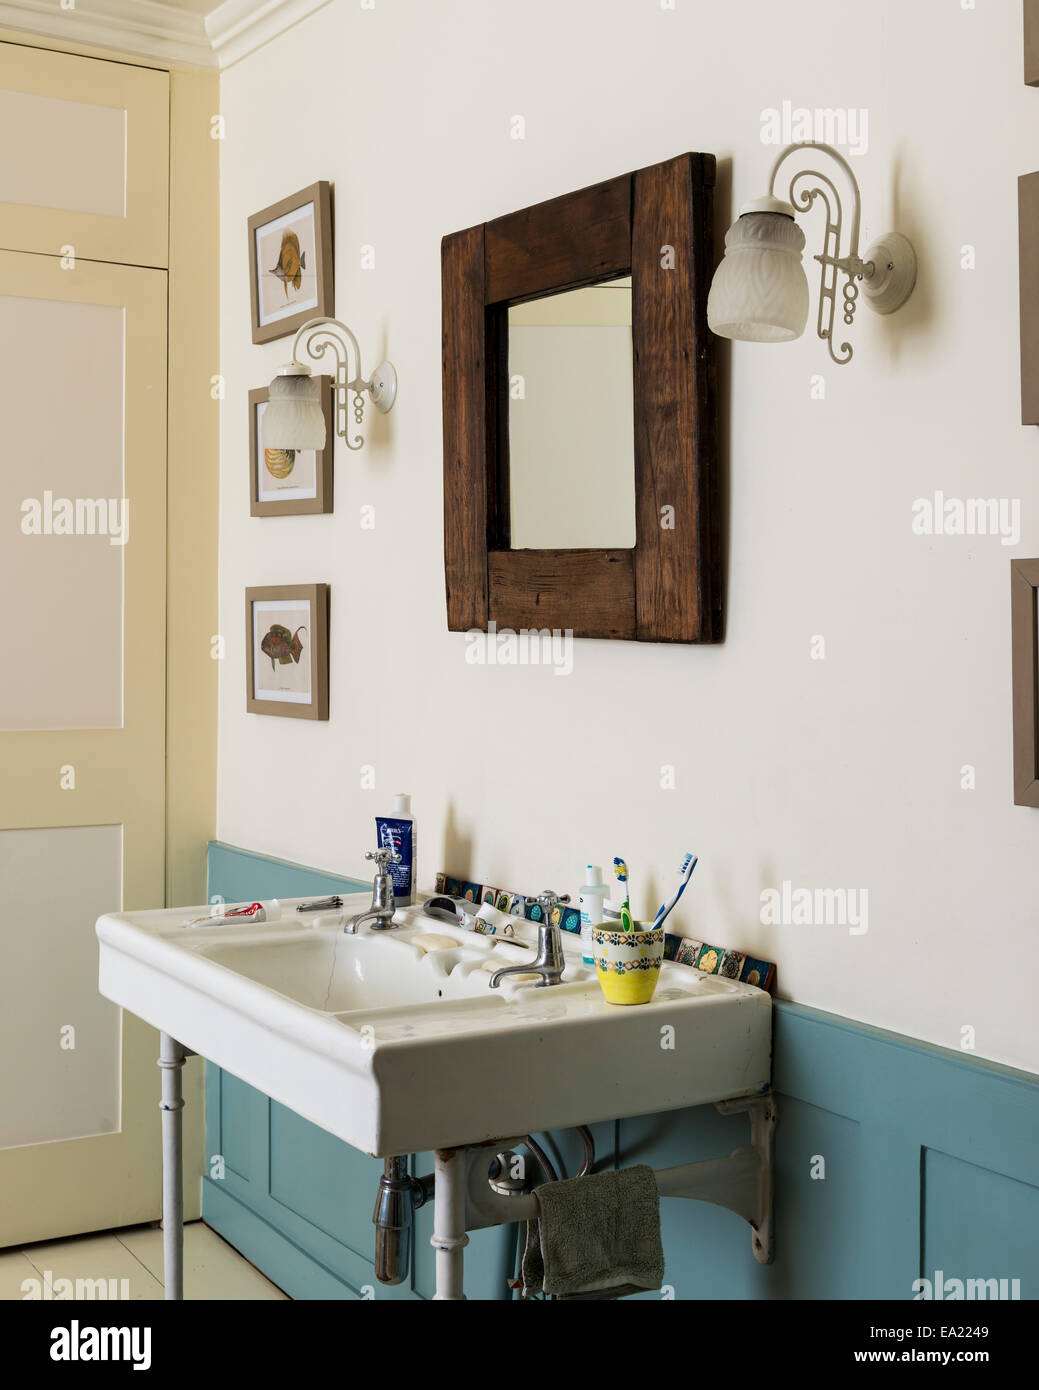 Driftwood style mirror above basin in bathroom with framed fish prints Stock Photo